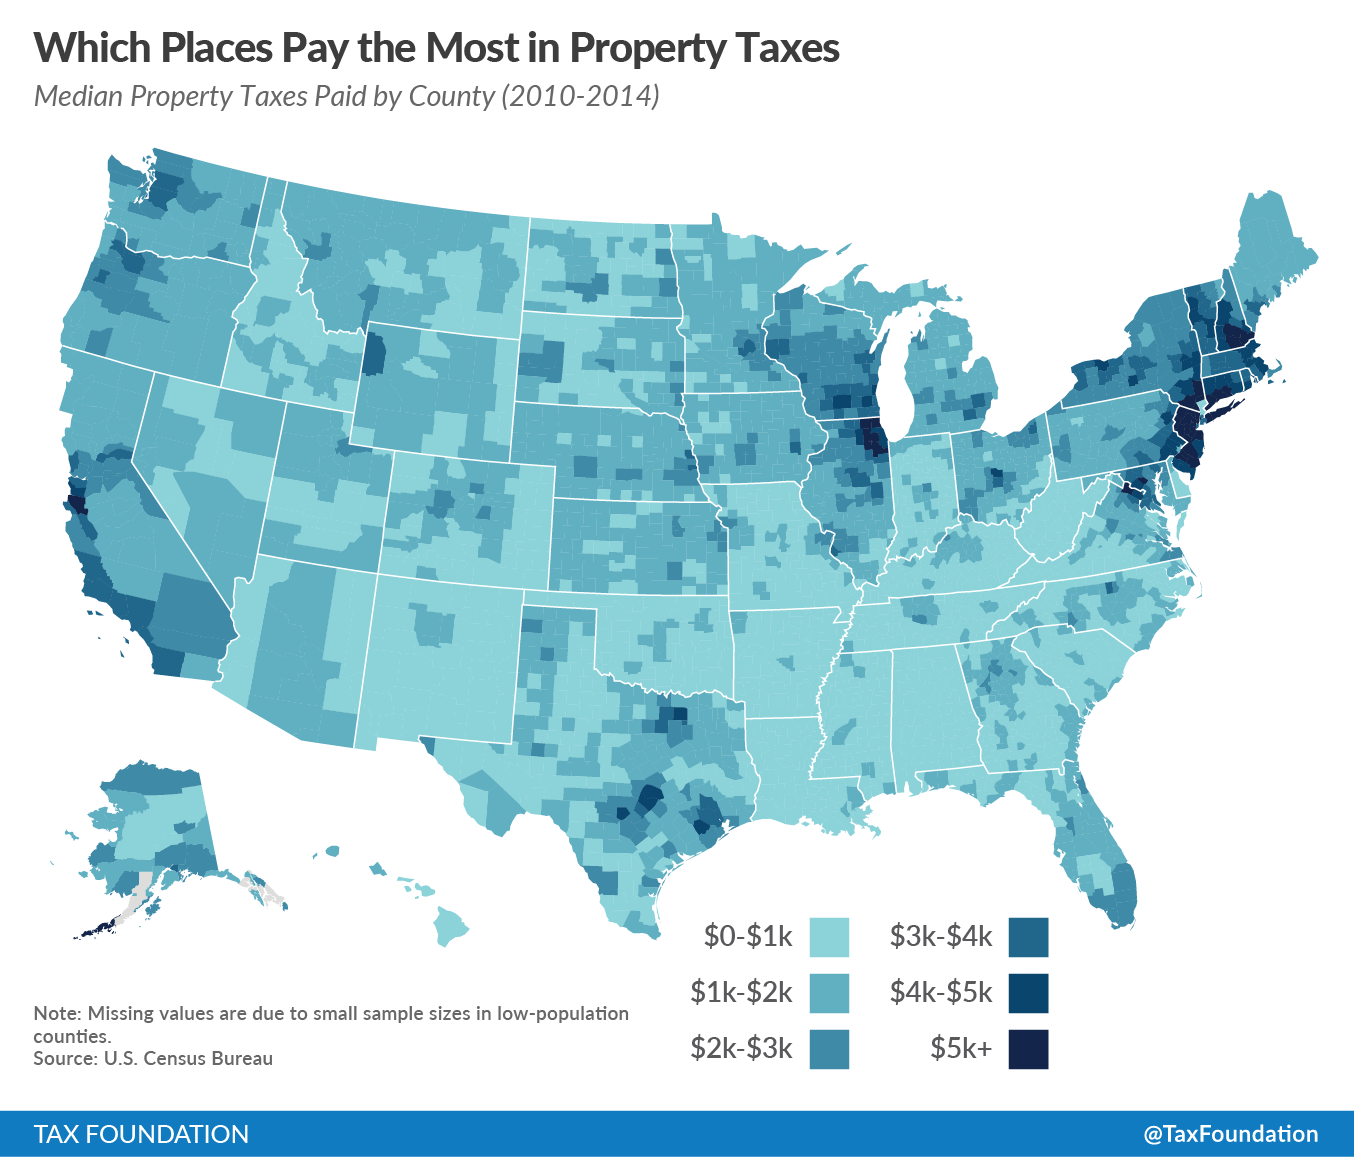 Median Property Taxes By County Tax Foundation